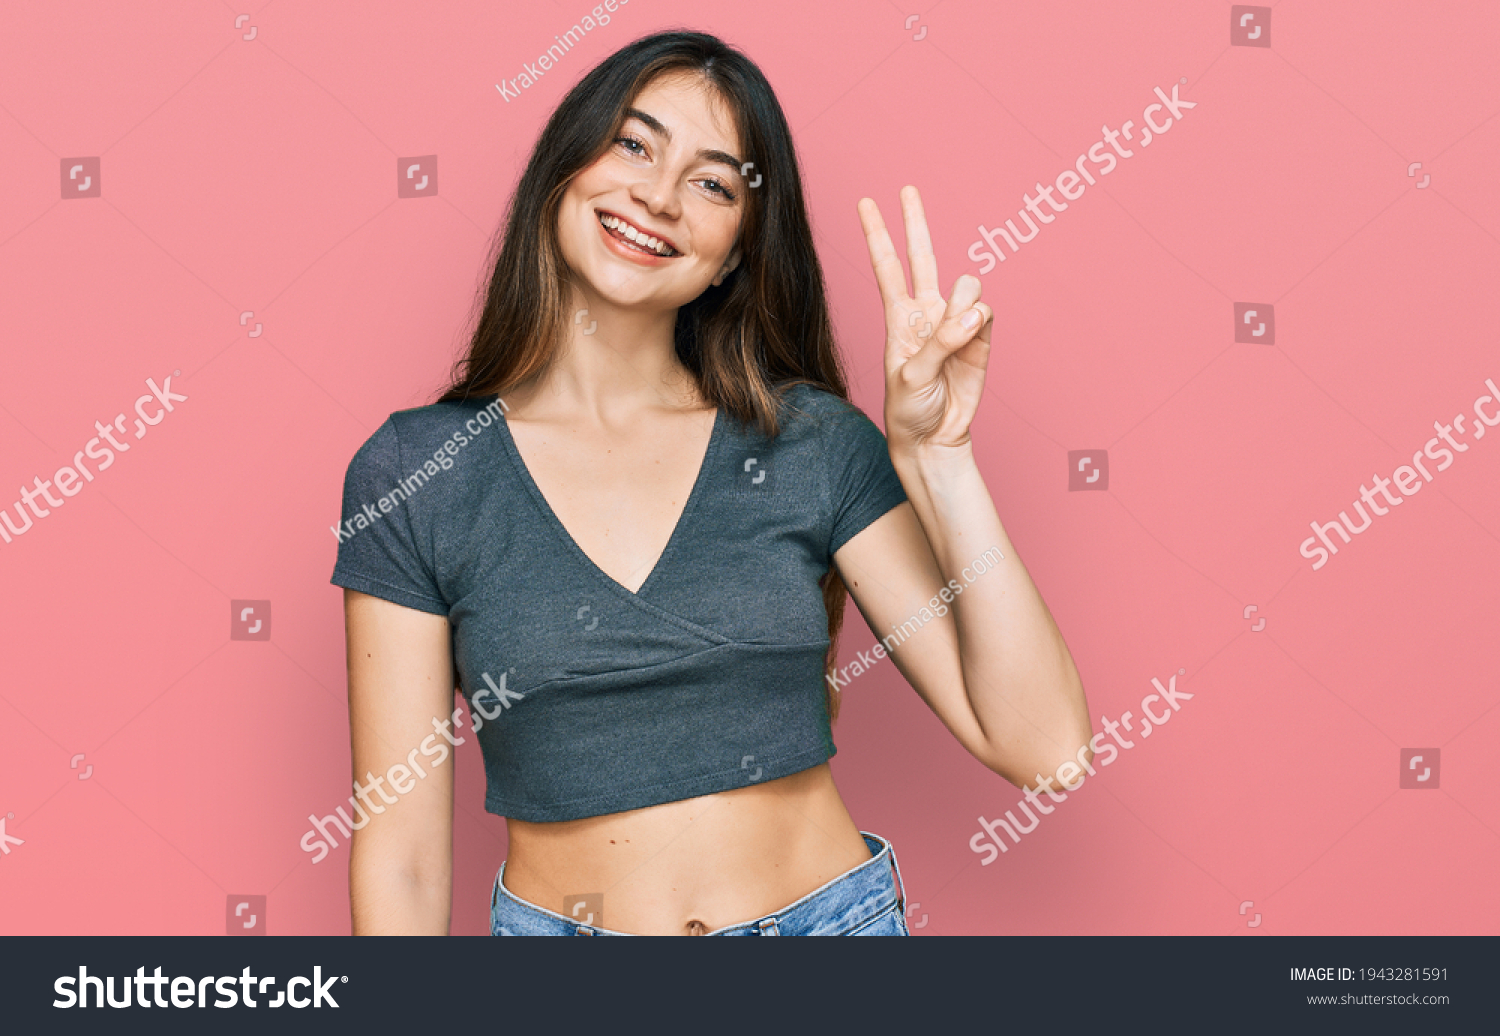 Young beautiful teen girl wearing casual crop top t shirt showing and pointing up with fingers number two while smiling confident and happy.  #1943281591